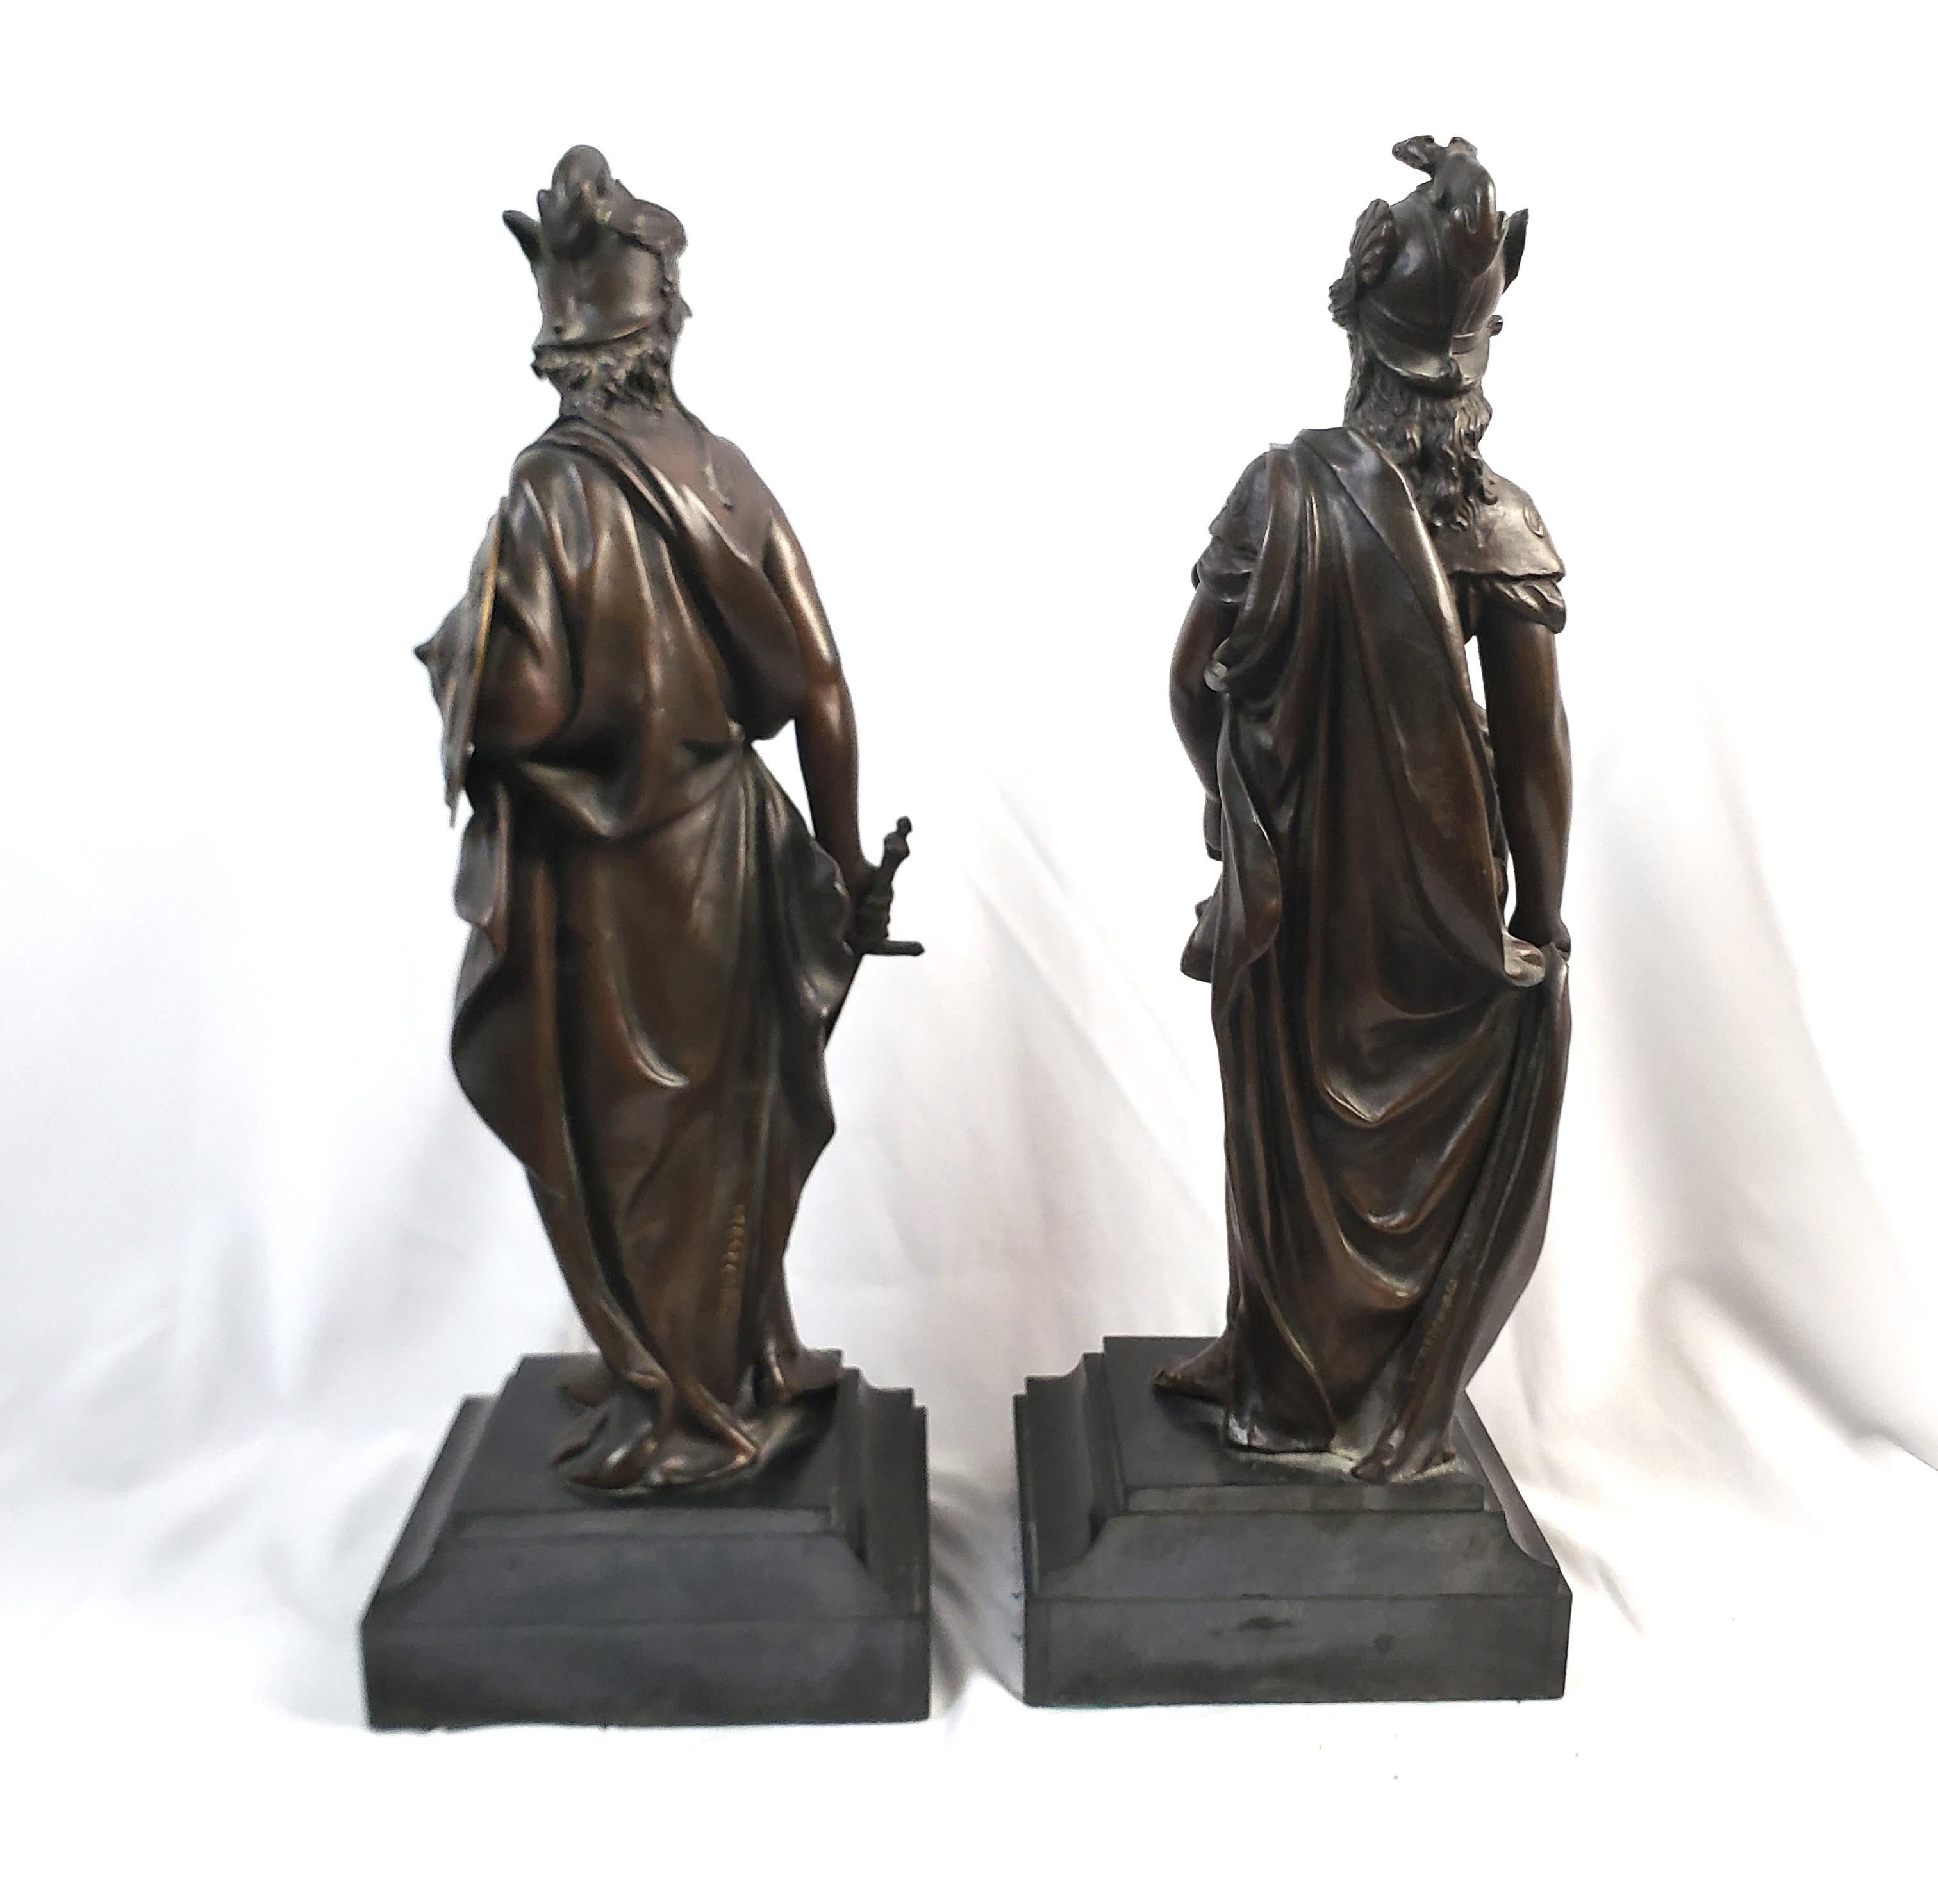 Pair of Antique French Bronze Figural Sculptures of Mars and Minerva In Good Condition For Sale In Hamilton, Ontario